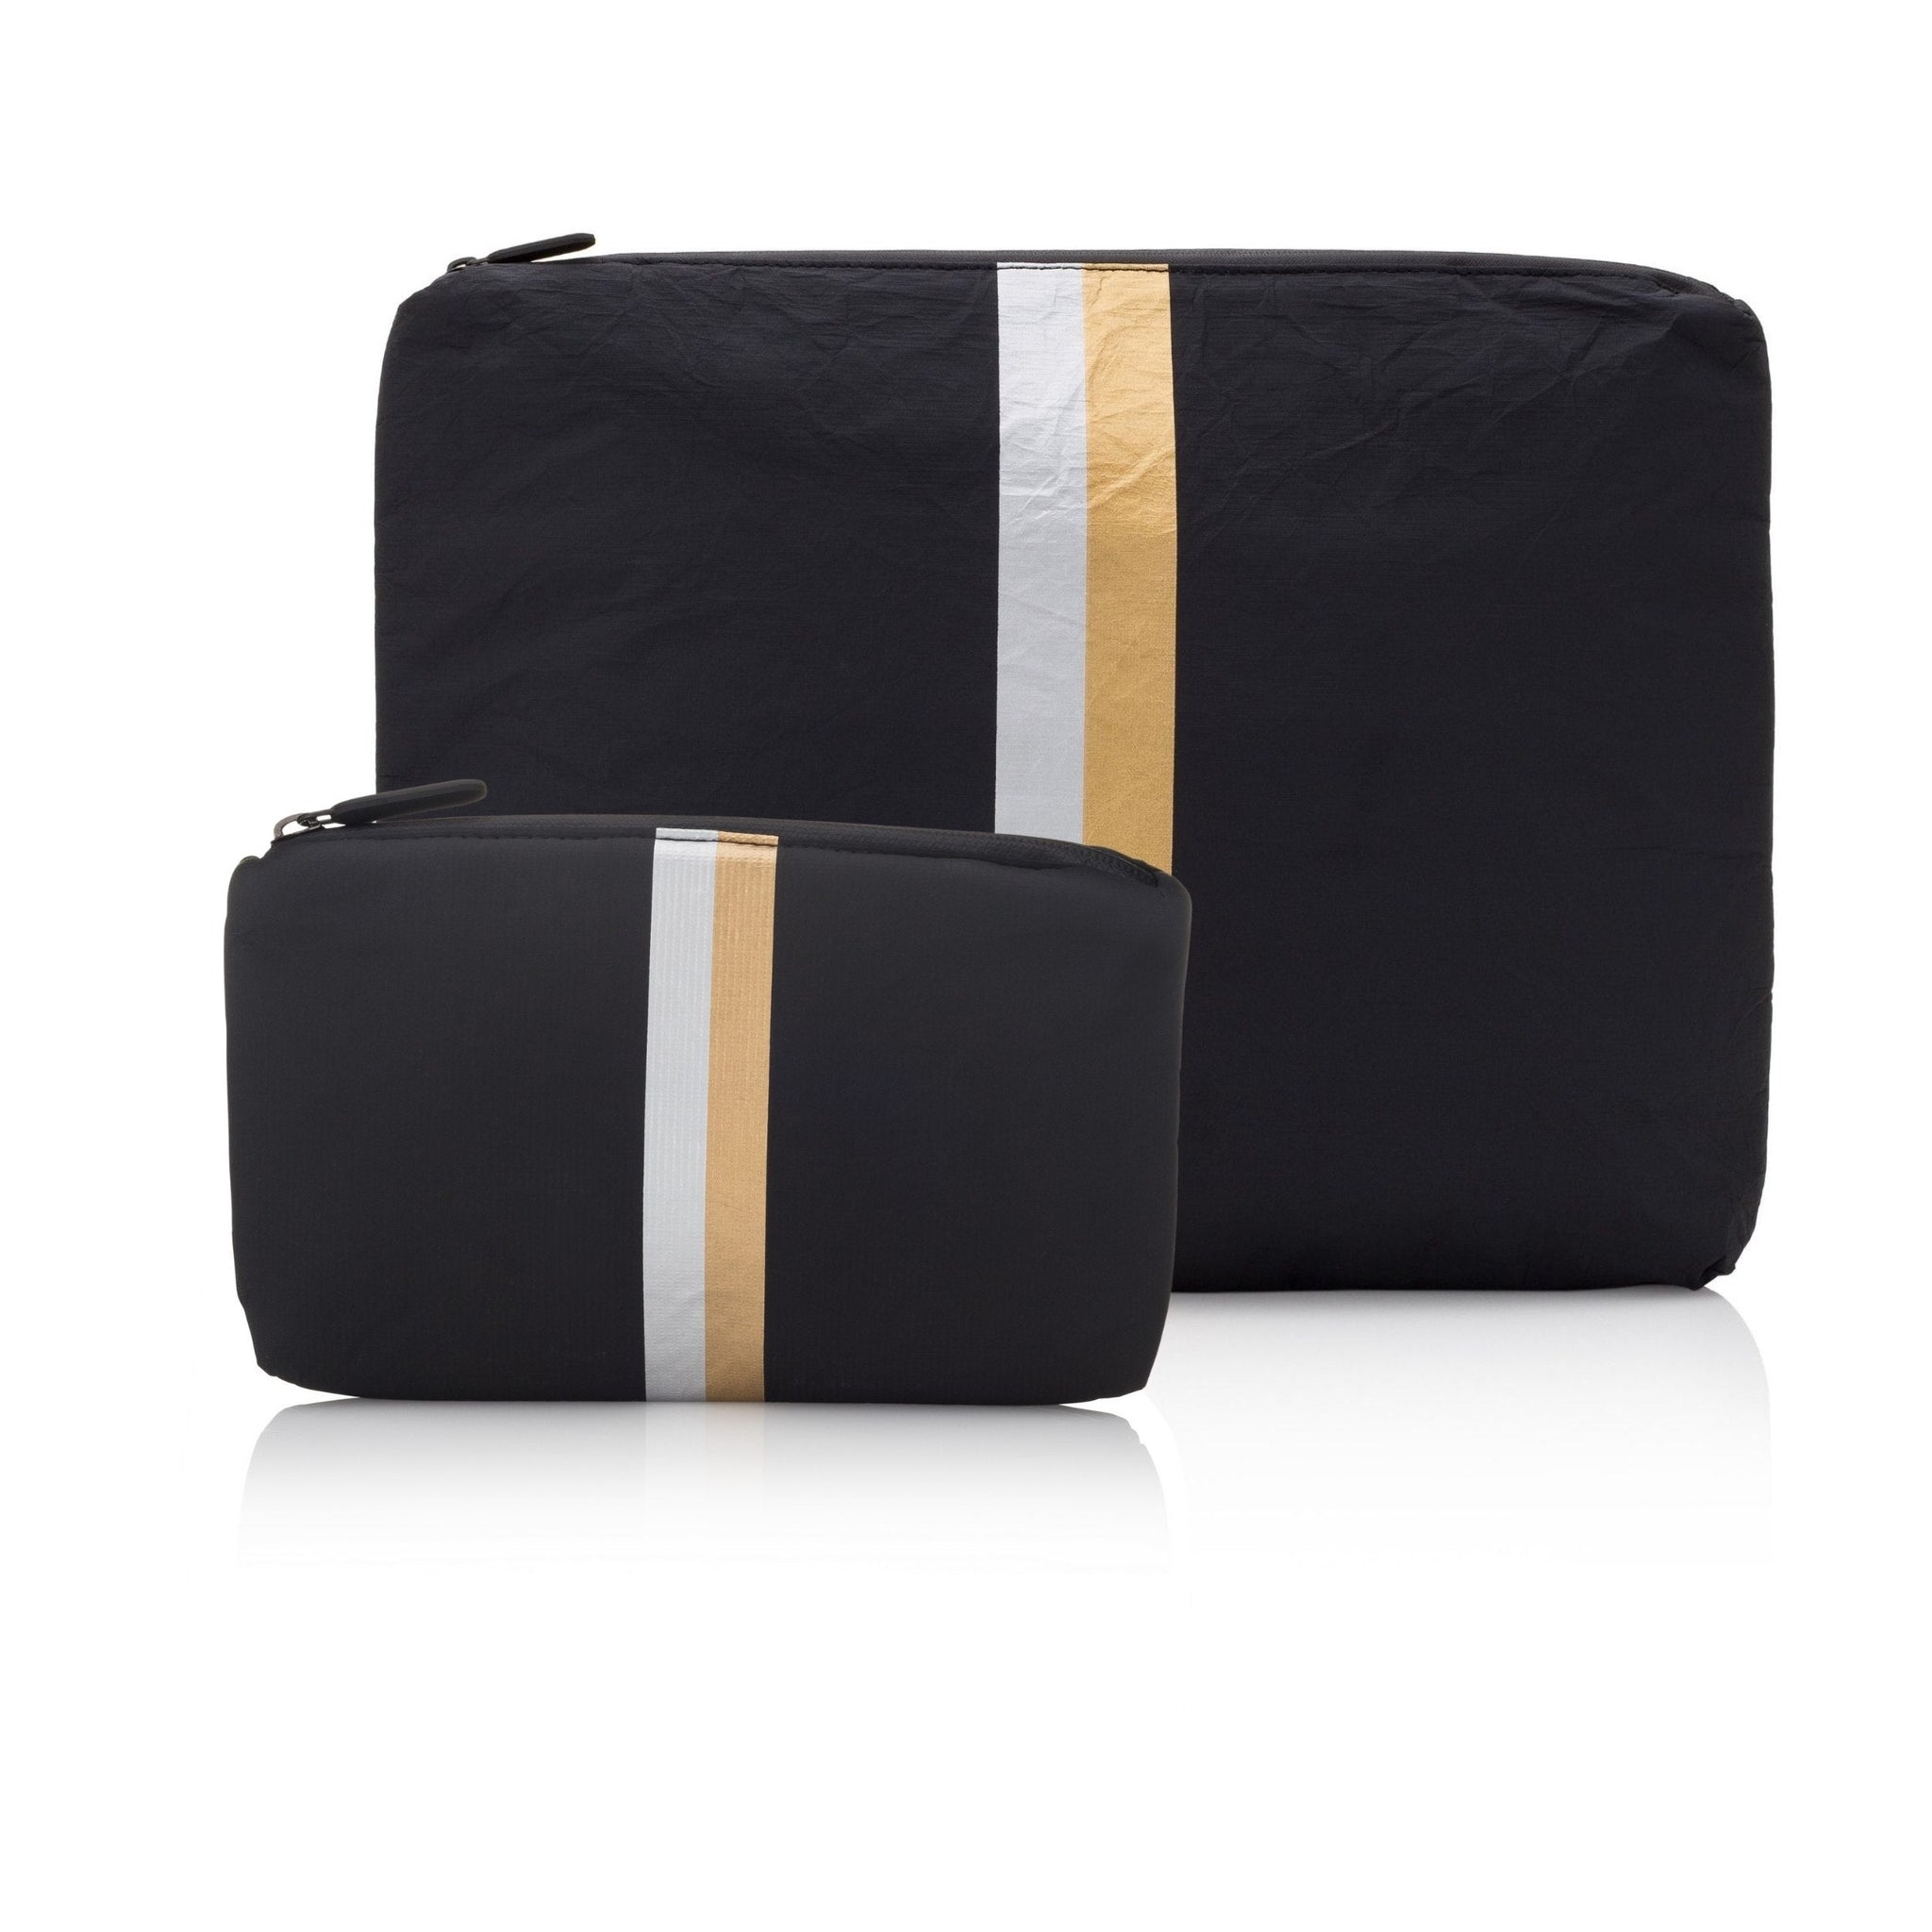 Set of Two - Organizational Packs - Black with Silver and Gold Stripes